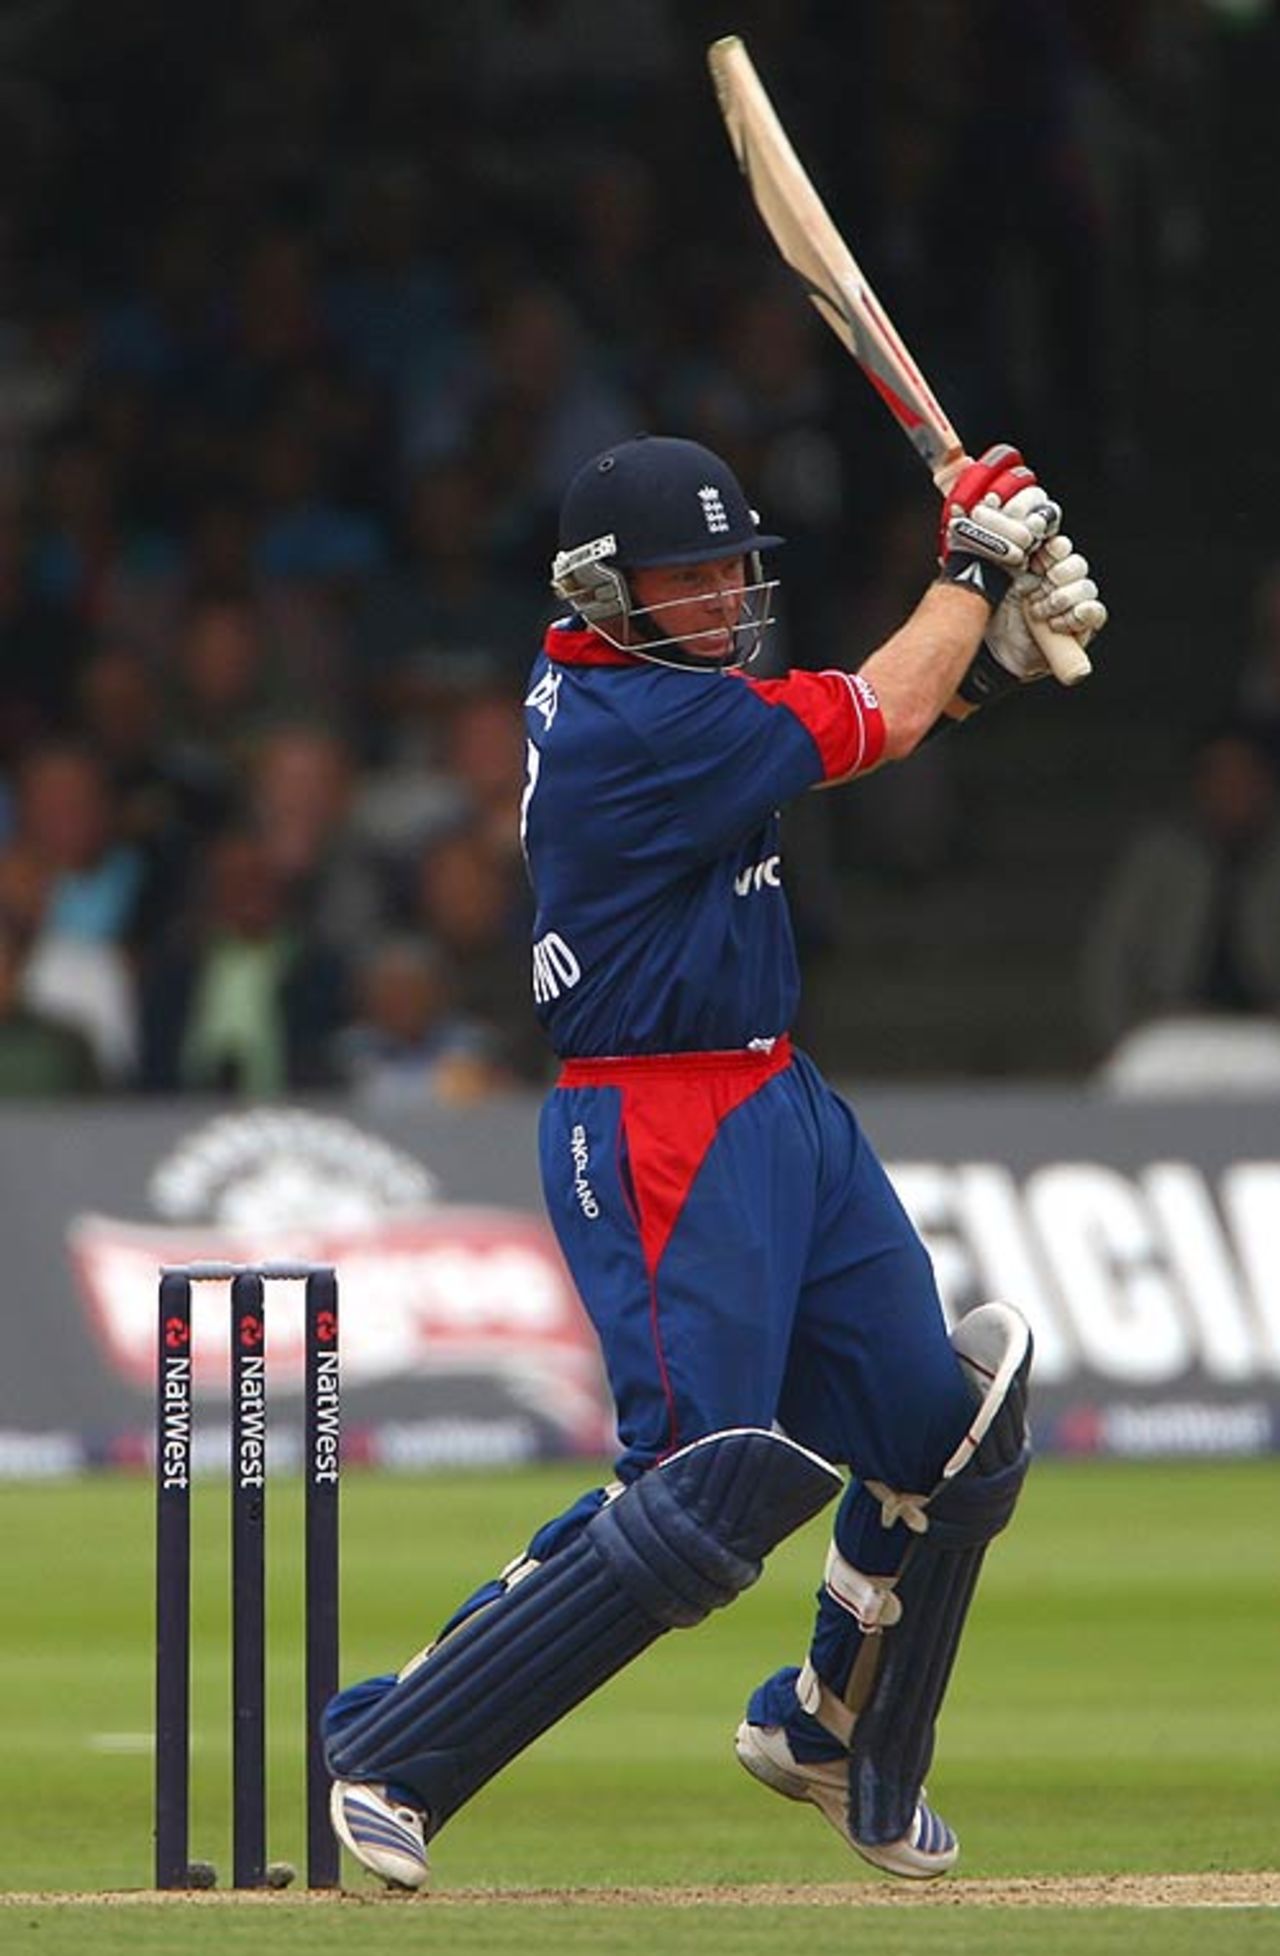 Ian Bell scored 36 as England recovered from a shaky start, England v India, 7th ODI, Lord's, September 8, 2007